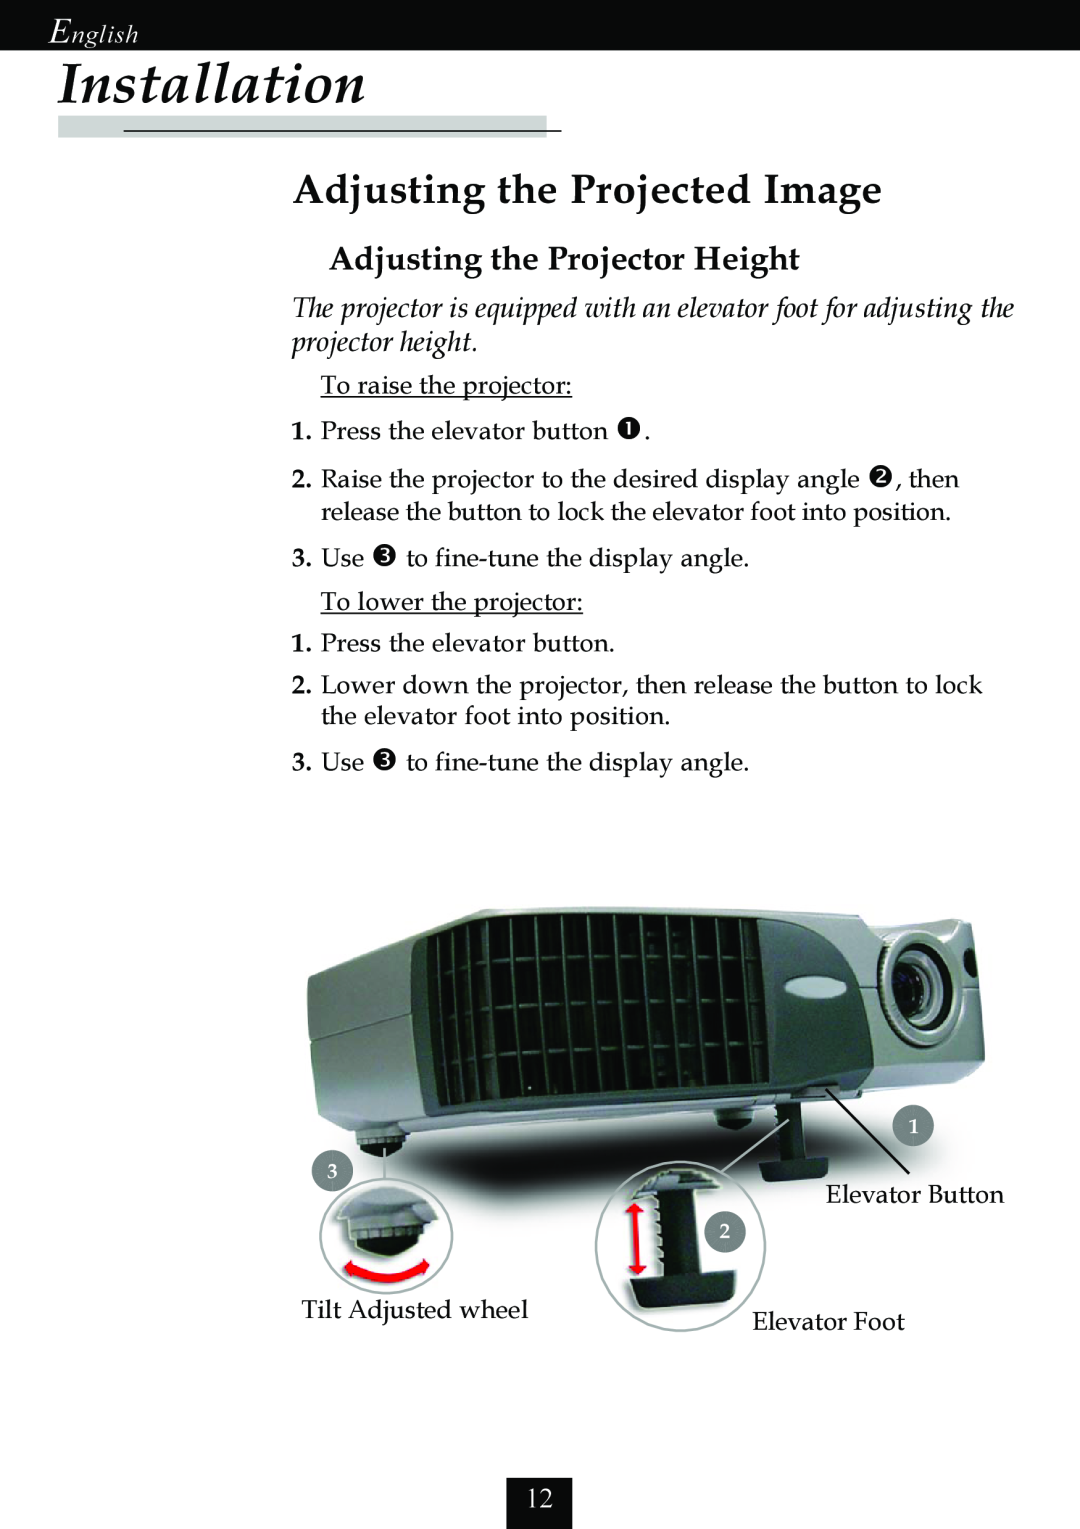 Optoma Technology EP725 specifications Adjusting the Projected Image, Adjusting the Projector Height, Installation, English 